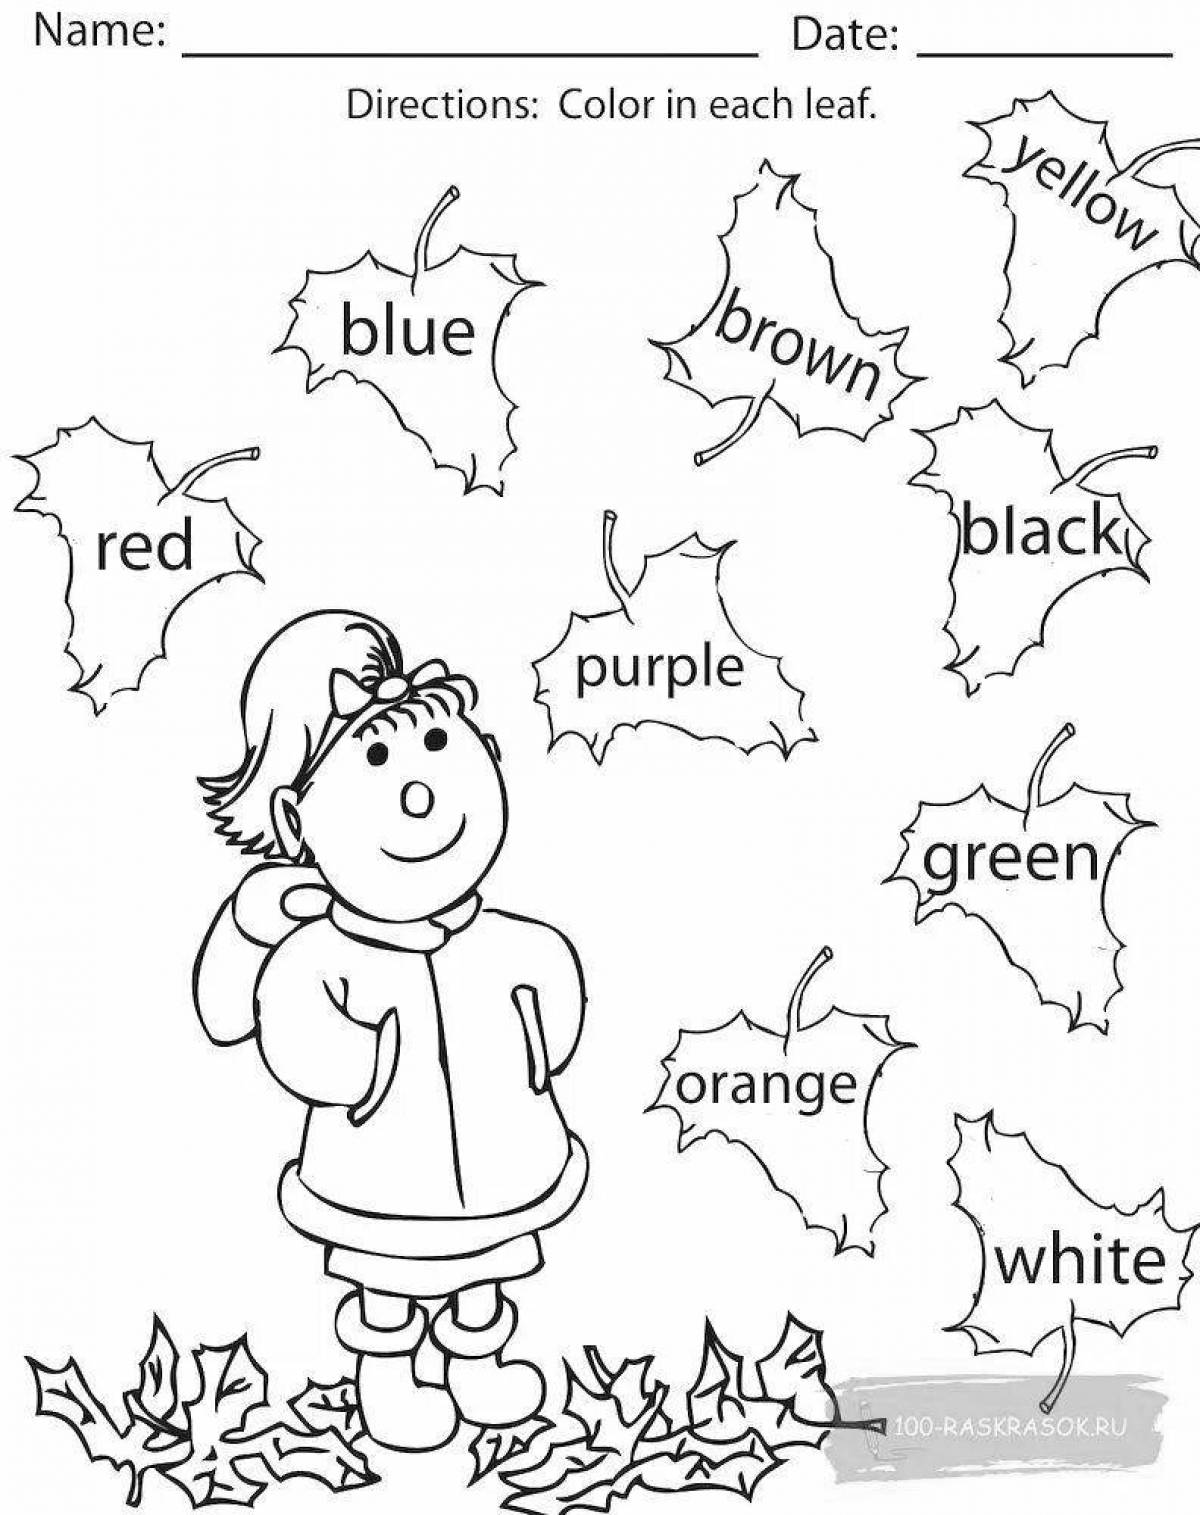 Fun coloring book with english assignments for grade 4